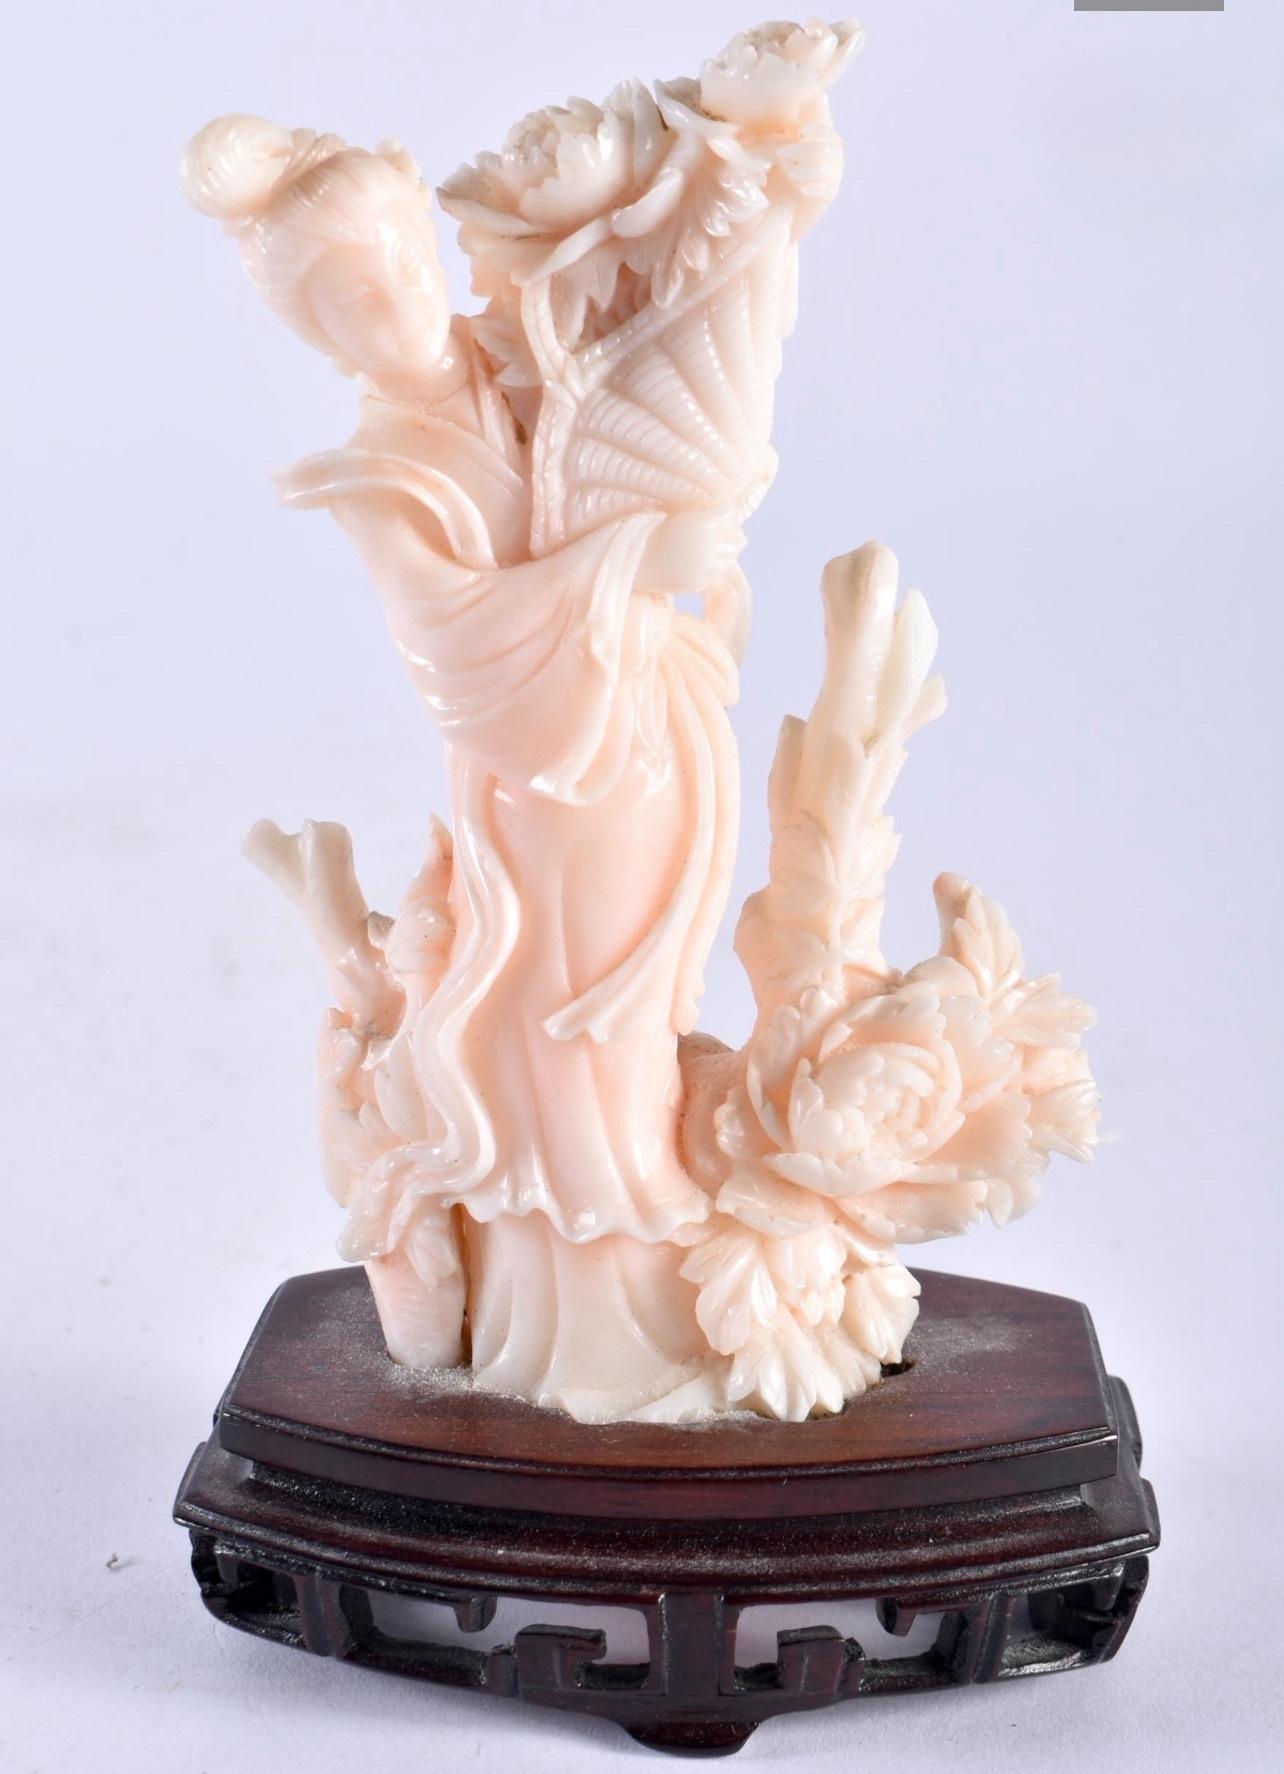 CHINESE HAND CARVED ANGEL SKIN NATURAL CORAL FIGURE OF A BEAUTY.
Late 19th C. Qing Dynasty.

Magnificently carved Chinese coral female beauty figurine standing surrounded with flowers and branches and holding a basket with flowers. 
Beauty is